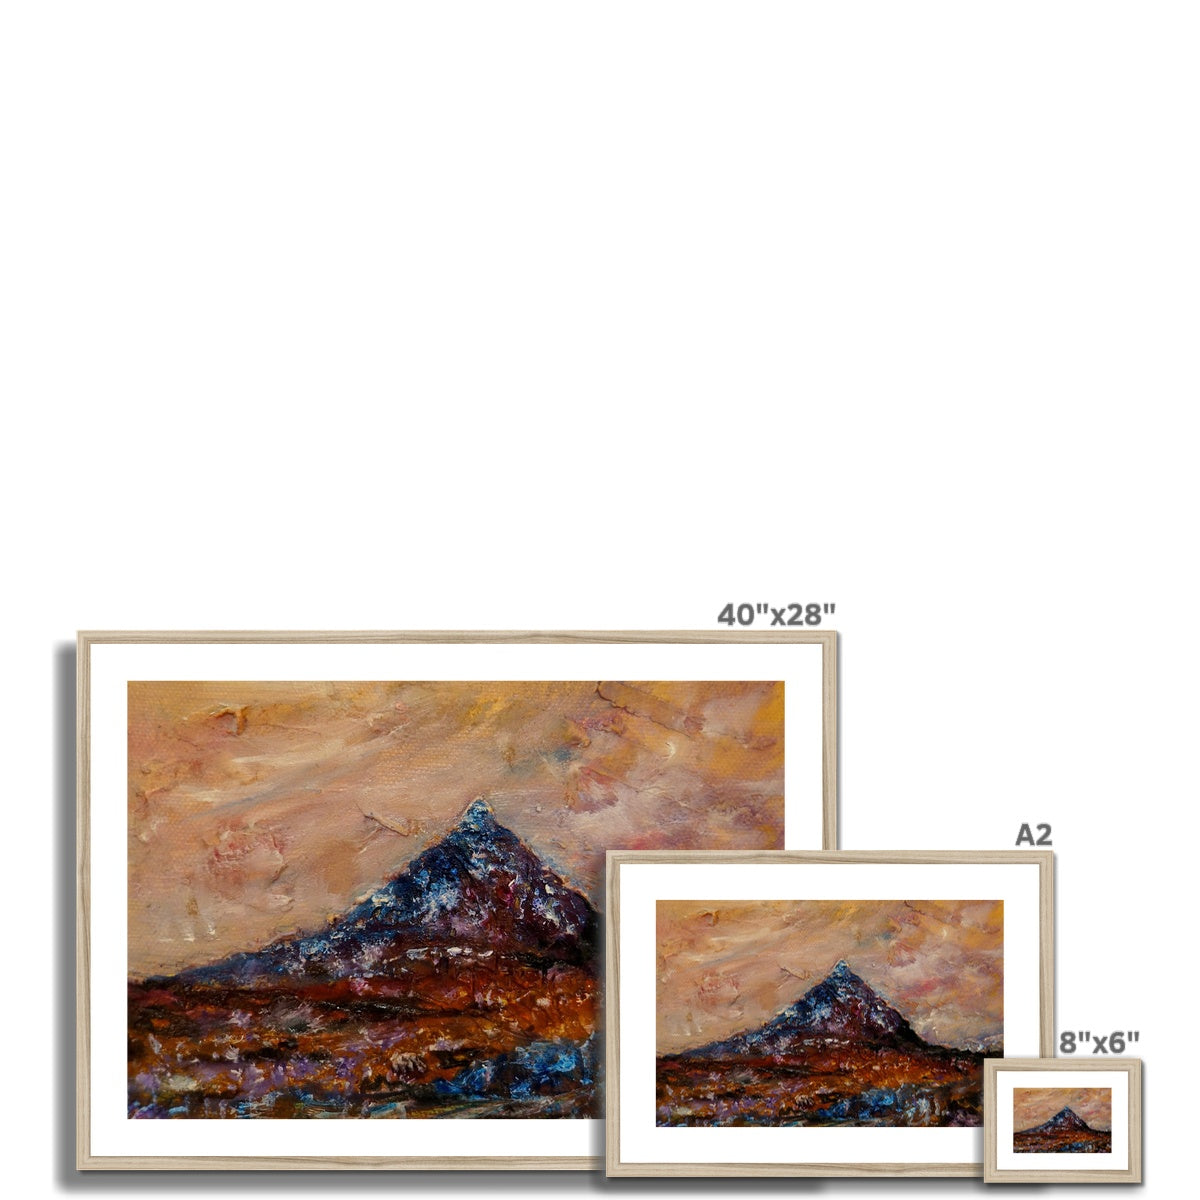 Buachaille Etive Mòr Painting | Framed & Mounted Prints From Scotland-Framed & Mounted Prints-Glencoe Art Gallery-Paintings, Prints, Homeware, Art Gifts From Scotland By Scottish Artist Kevin Hunter